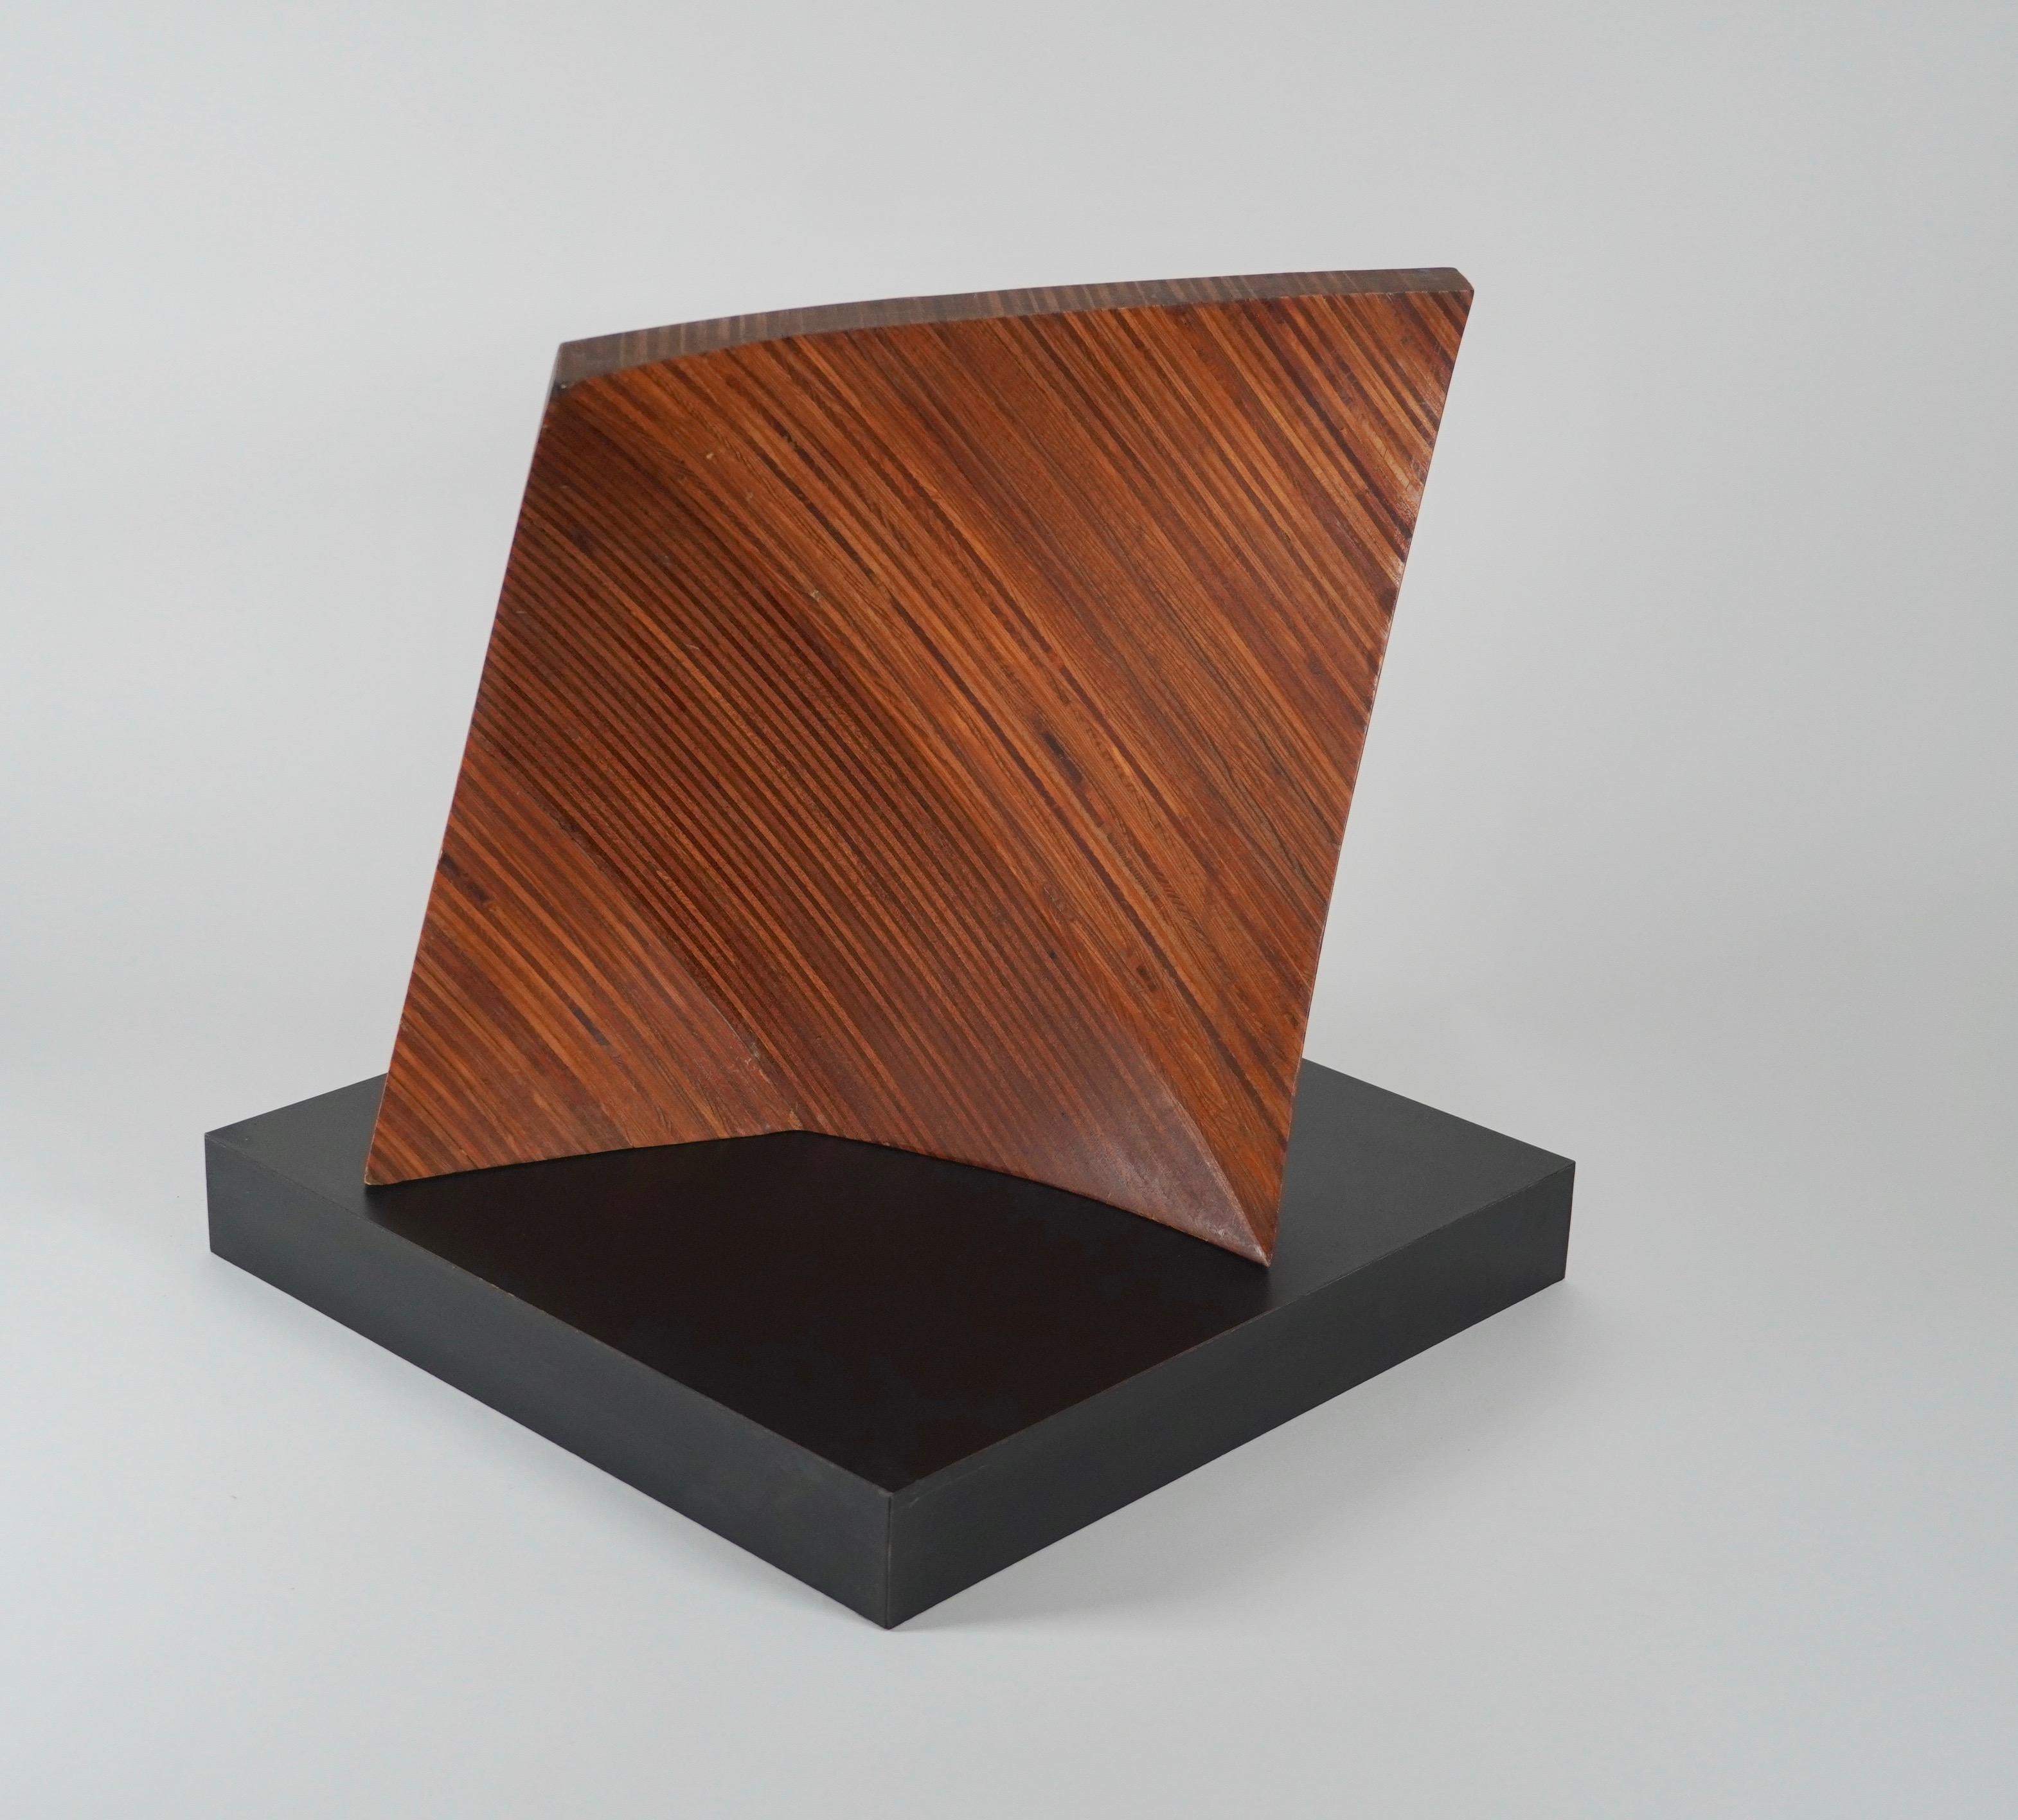 Free form wooden sculpture circa 1970s created out of various solid hardwood laminations and then hand formed into a slight twist with a cascade. Mounted on a square mat black laminate base. Rich hues to the woods having a gotten a golden patina